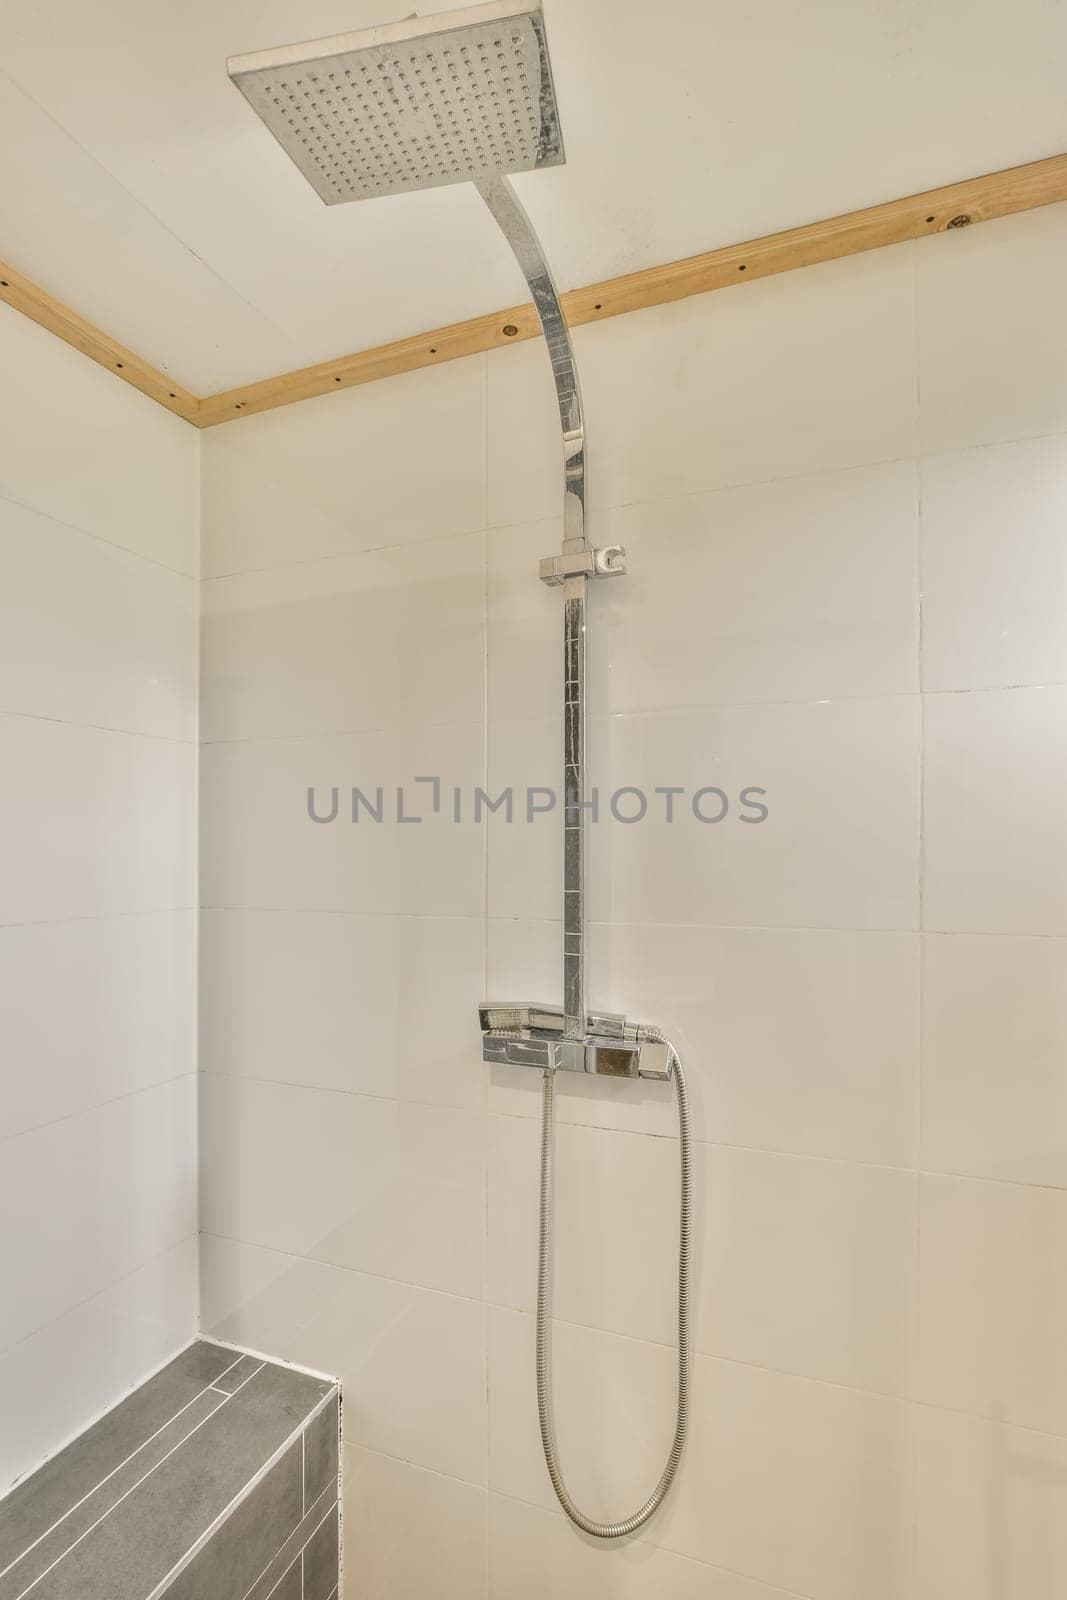 a modern bathroom with white tiles and wood trim on the walls, along with a shower head mounted to the wall